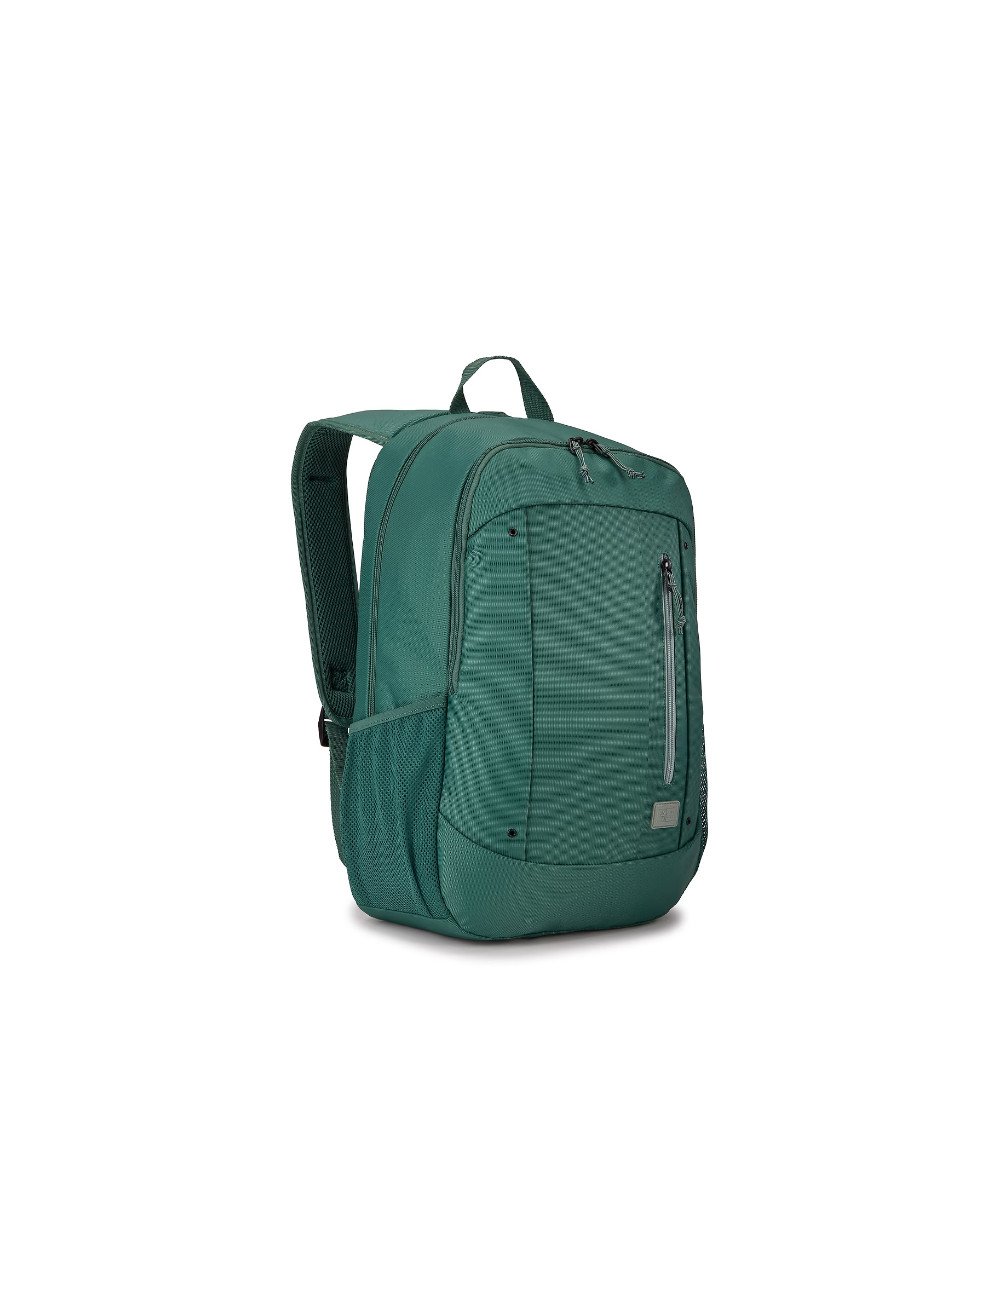 Case Logic | Fits up to size " | Jaunt Recycled Backpack | WMBP215 | Backpack for laptop | Smoke Pine | "